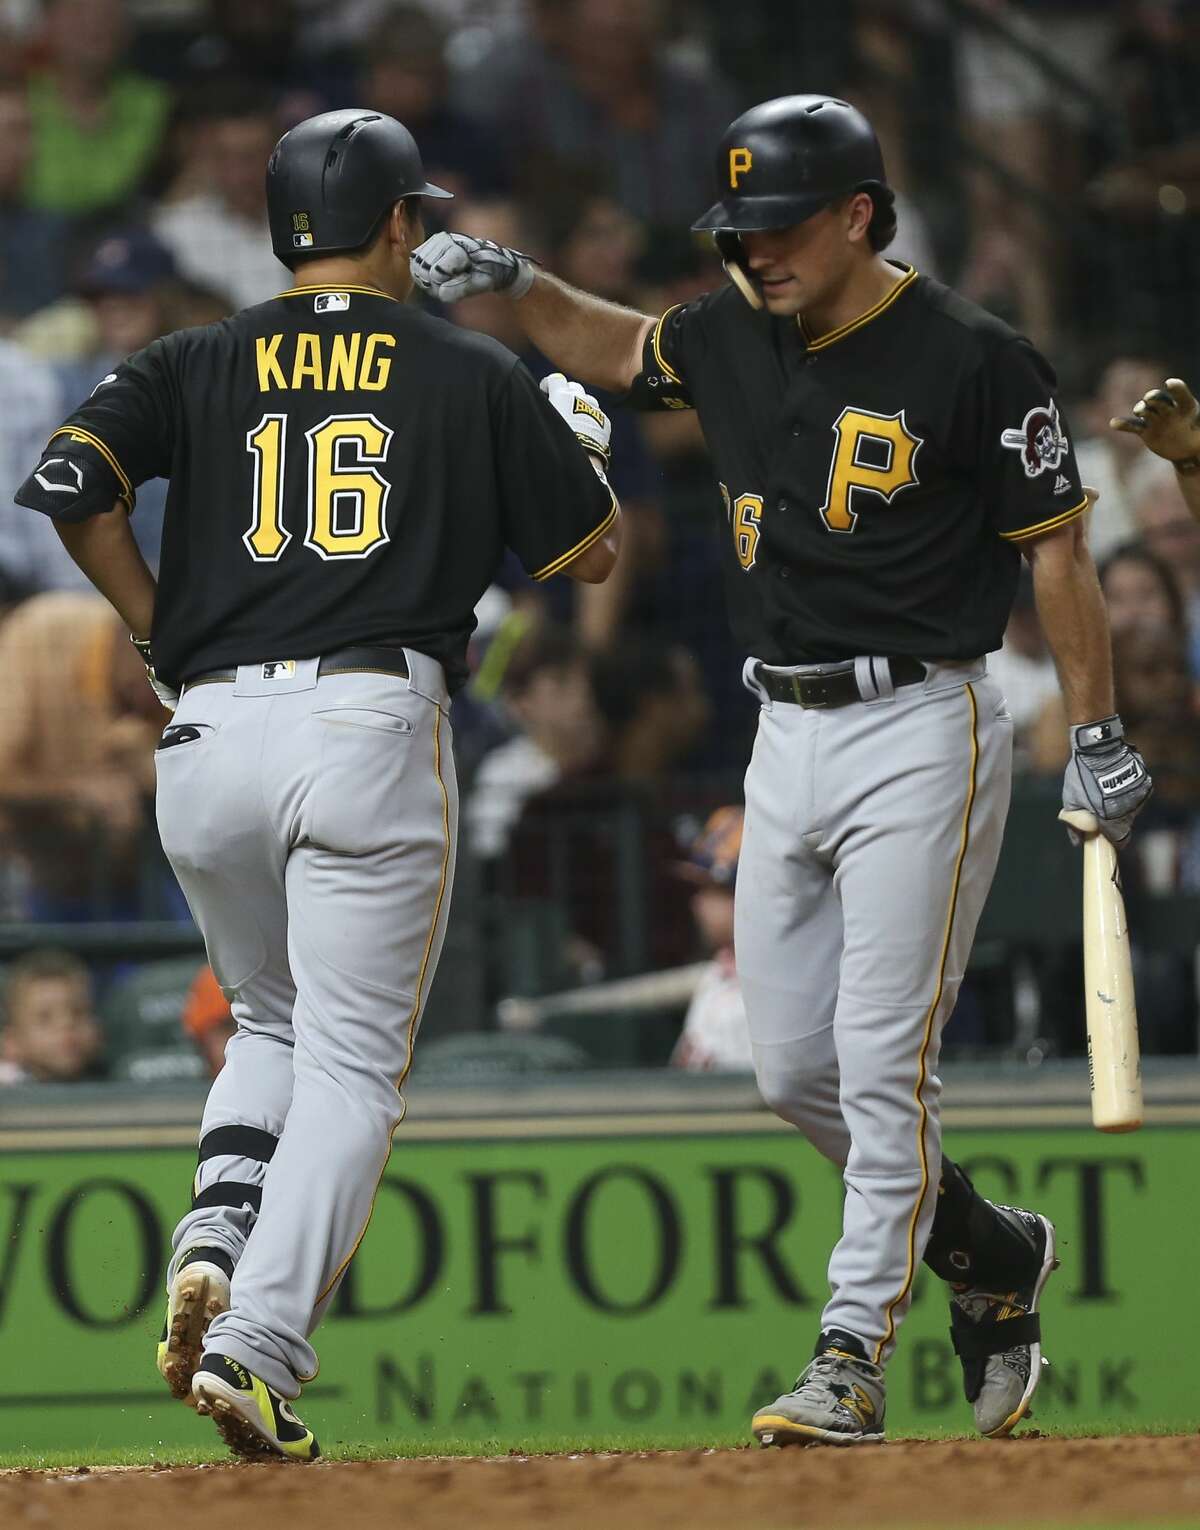 Pittsburgh Pirates third baseman Jung Ho Kang (16) is congratulated by Adam Frazier (26) after his two-run home run during the top sixth inning of the MLB game against the Houston Astros at Minute Maid Park on Wednesday, June 26, 2019, in Houston.